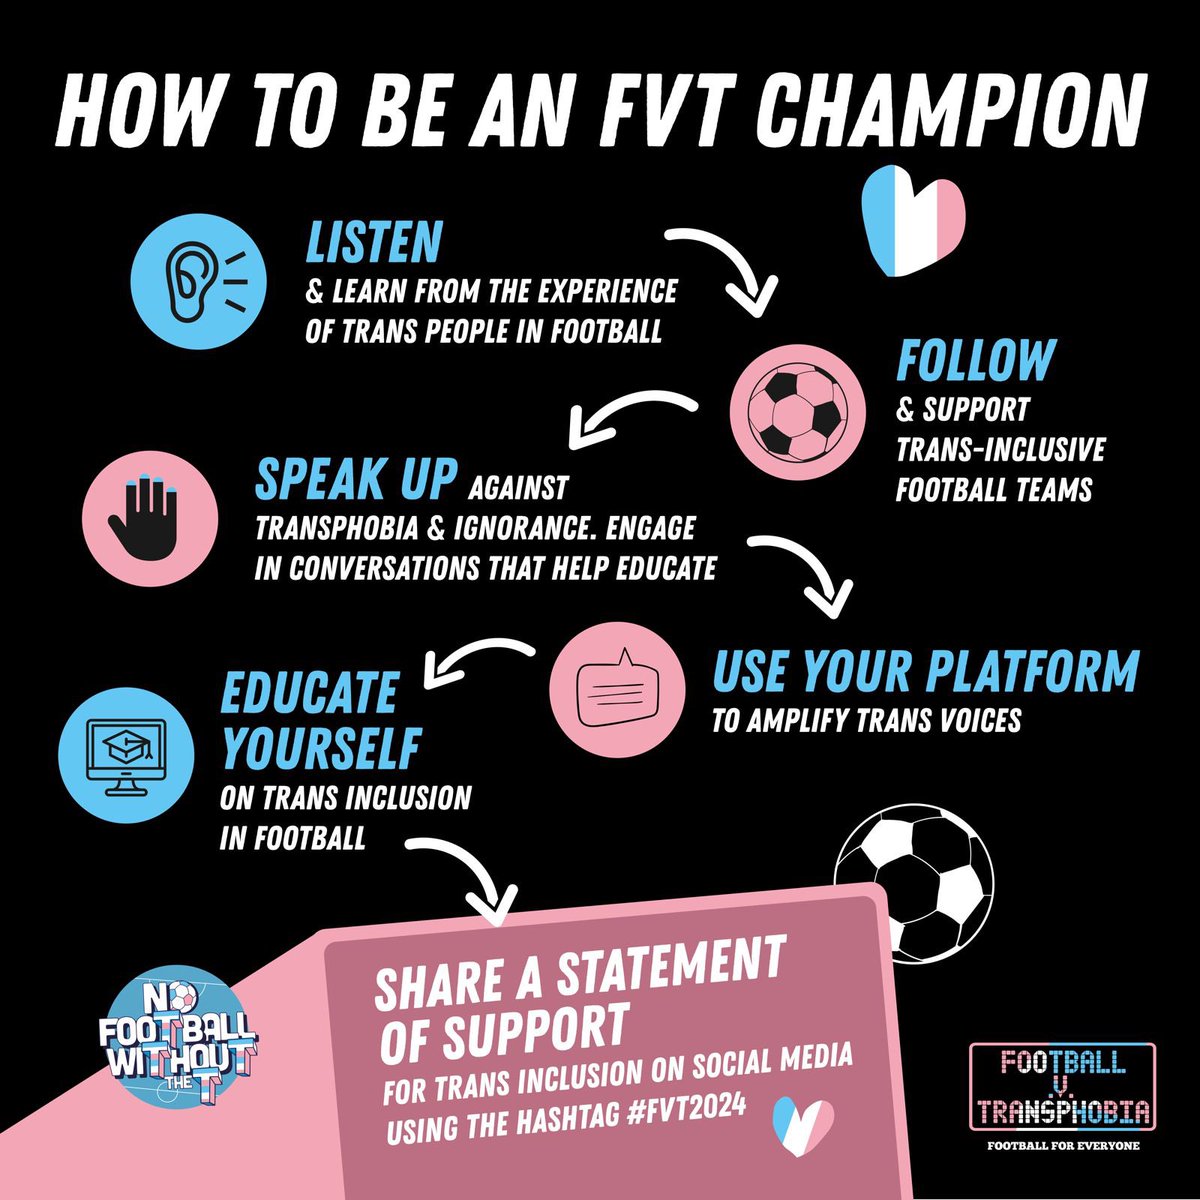 🏆BE A FOOTBALL v TRANSPHOBIA CHAMPION 🏆 ⚽️Listen & learn from the experience of trans people 🏳️‍⚧️Follow & support trans-inclusive teams ⚽️Speak up against transphobia & ignorance 🏳️‍⚧️Amplify trans voices ⚽️Educate yourself 🏳️‍⚧️Share a statement of support using the hashtag #FvT2024